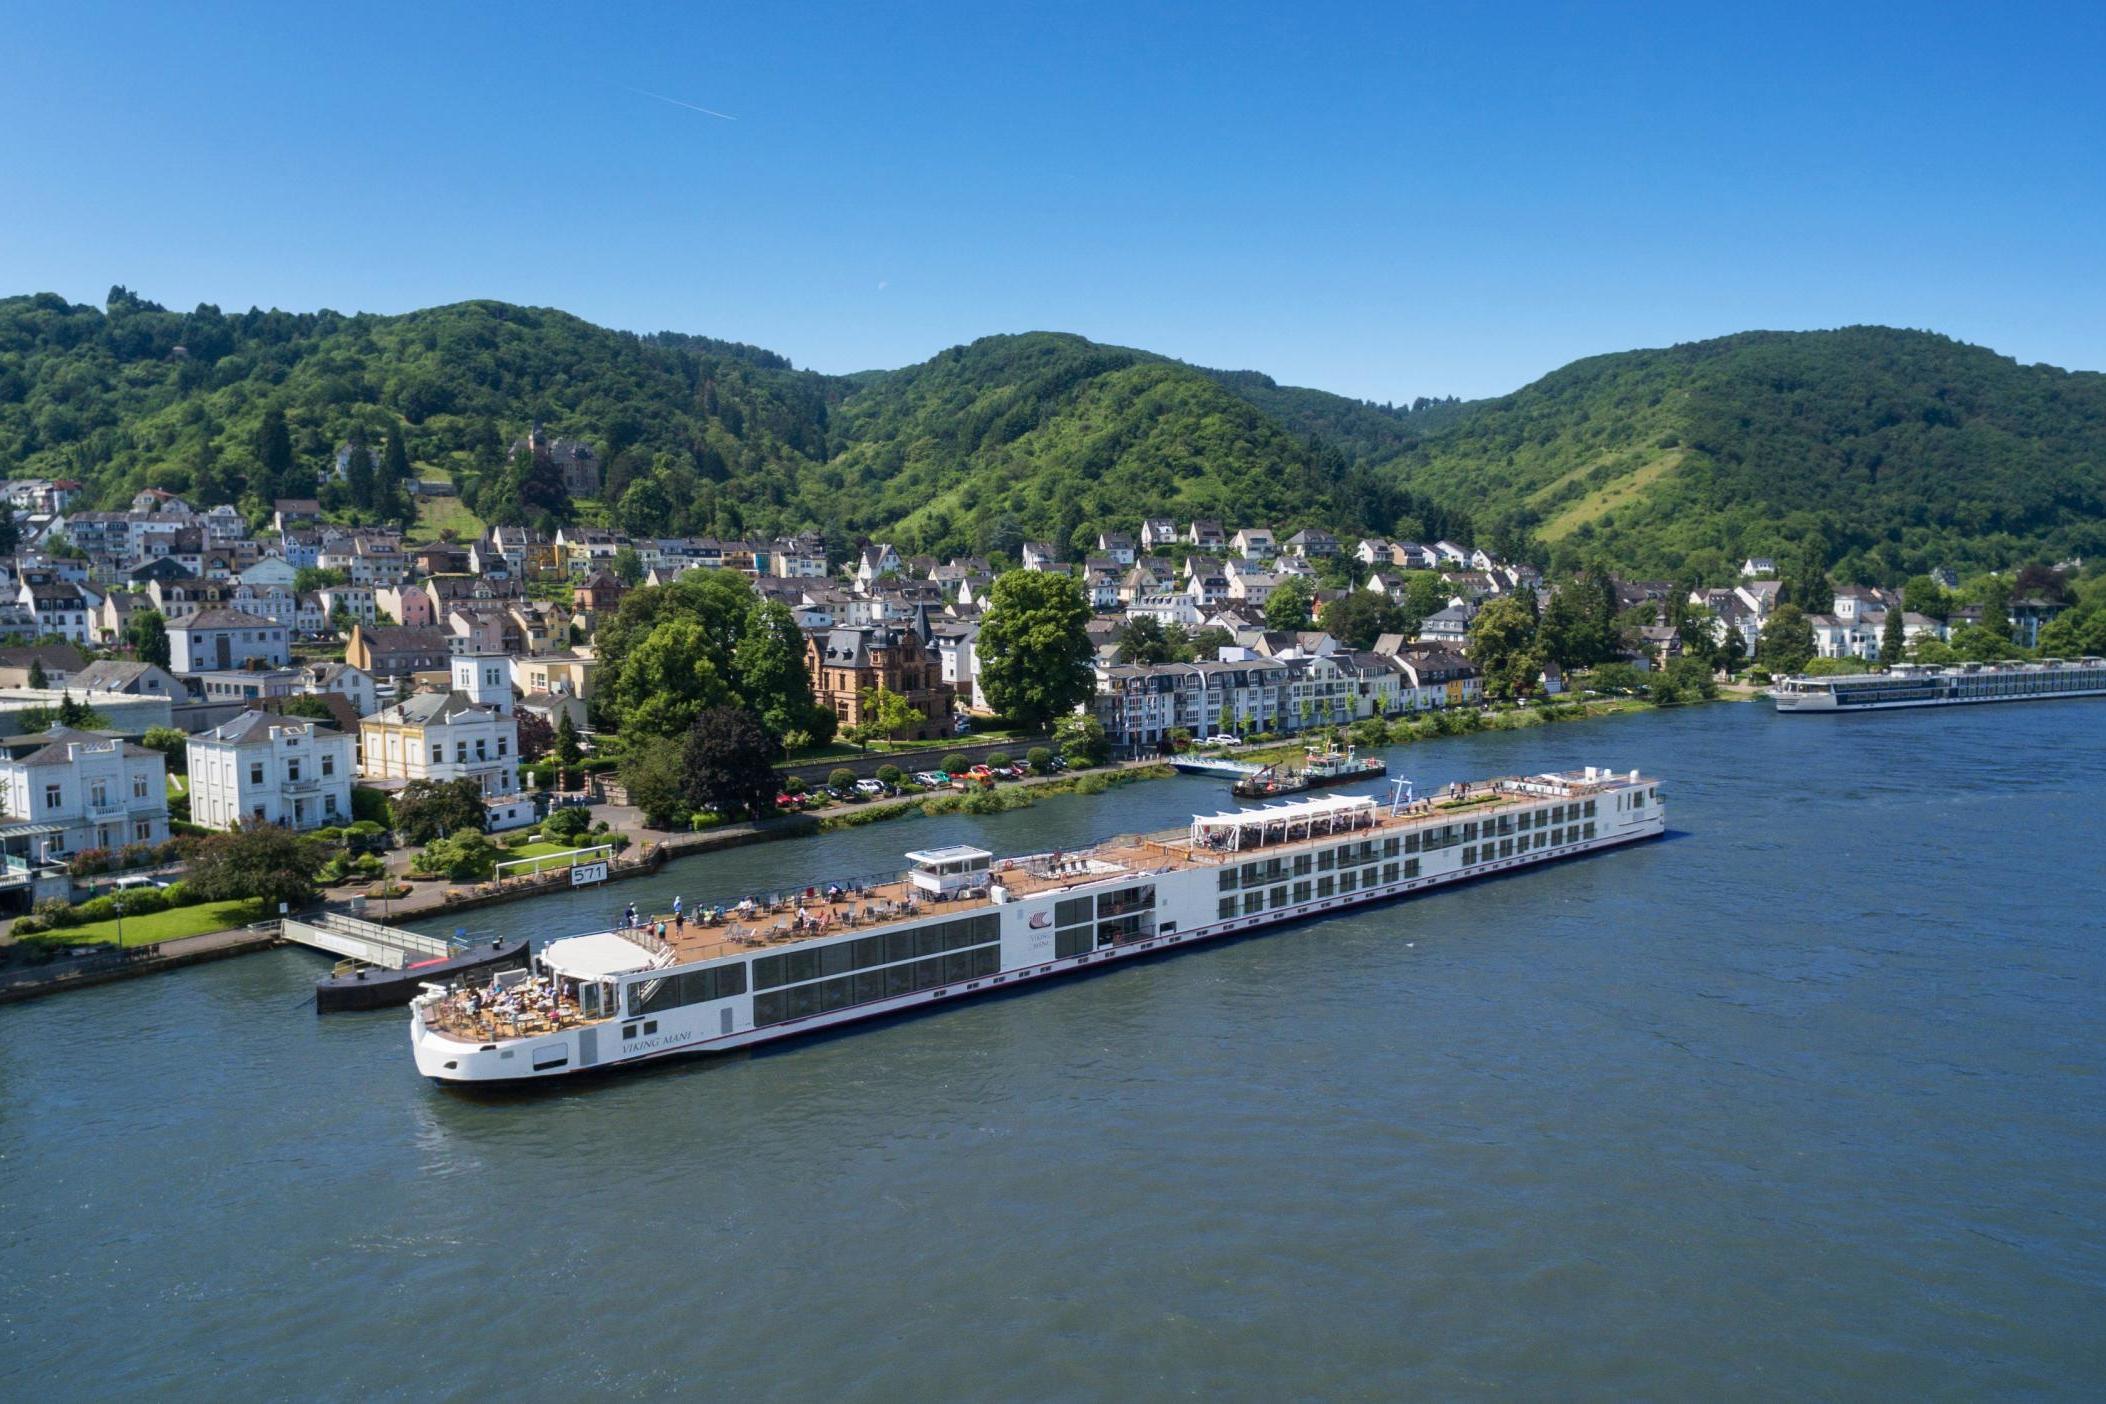 Viking specialises in river cruises